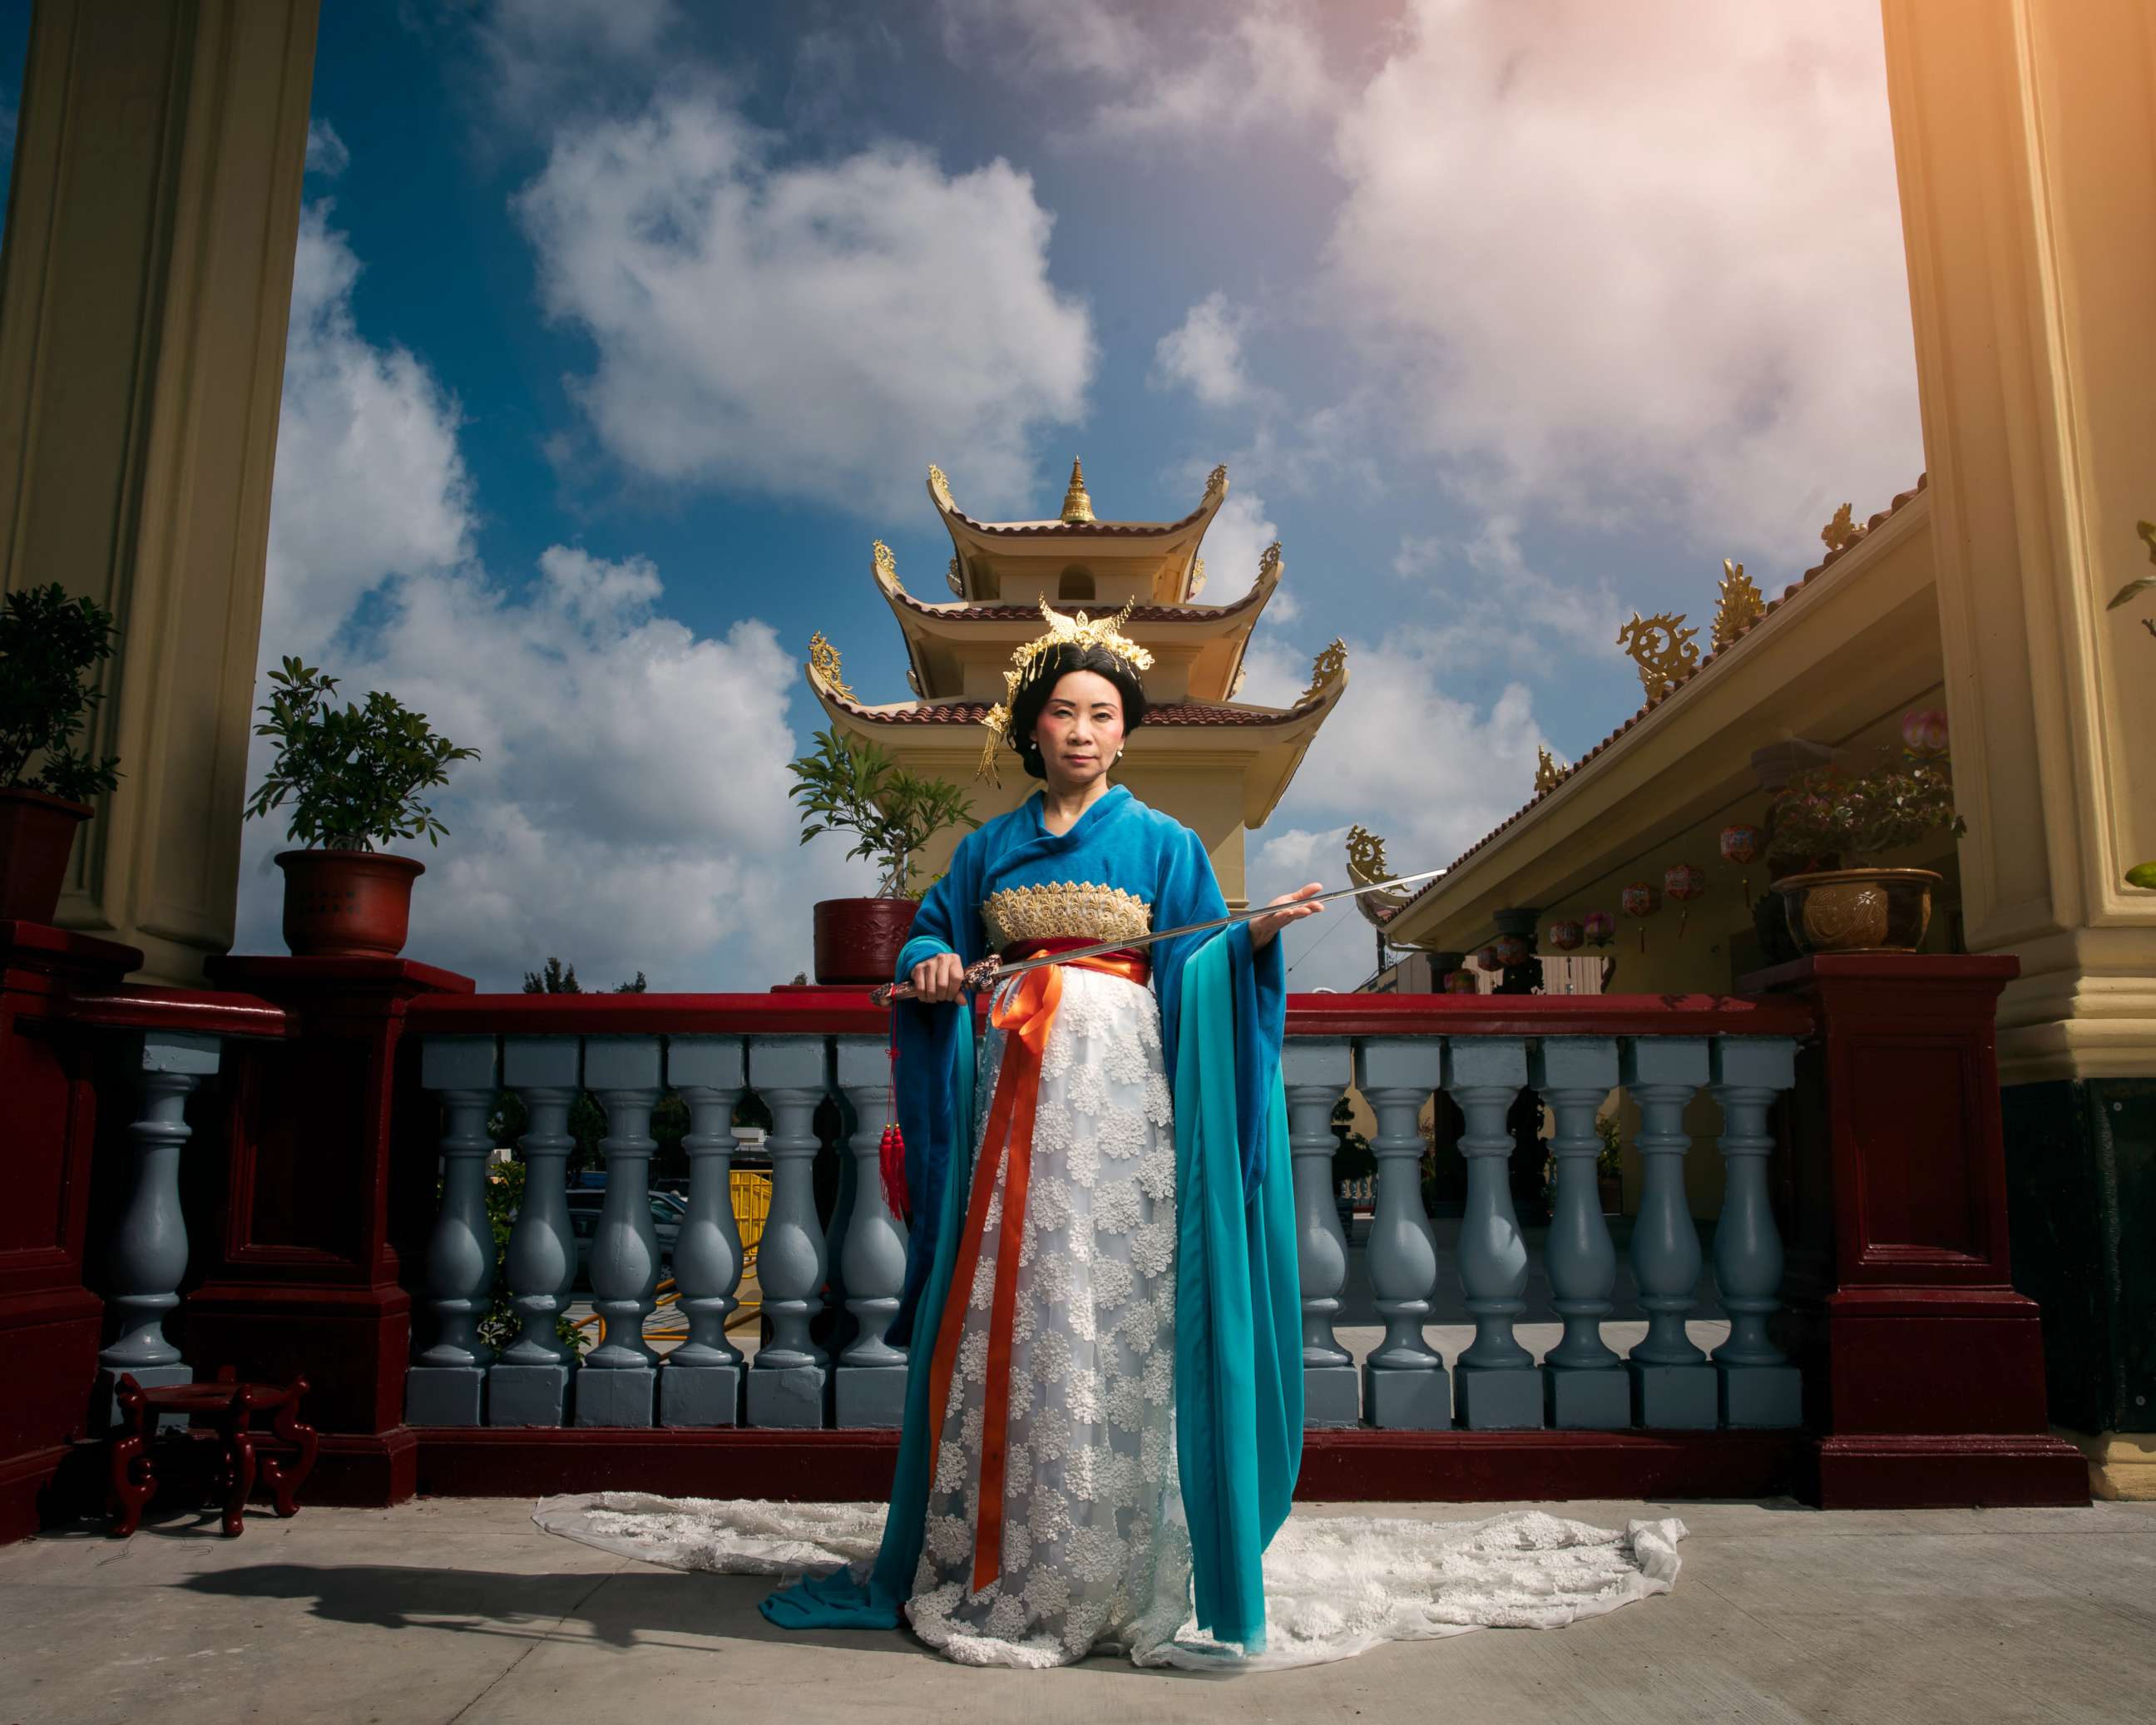 PHOTO: Mother Chi Huynh poses as Mulan's mother in a photo shoot conceptualized by designer Nephi Garcia and photographer Tony Ross.